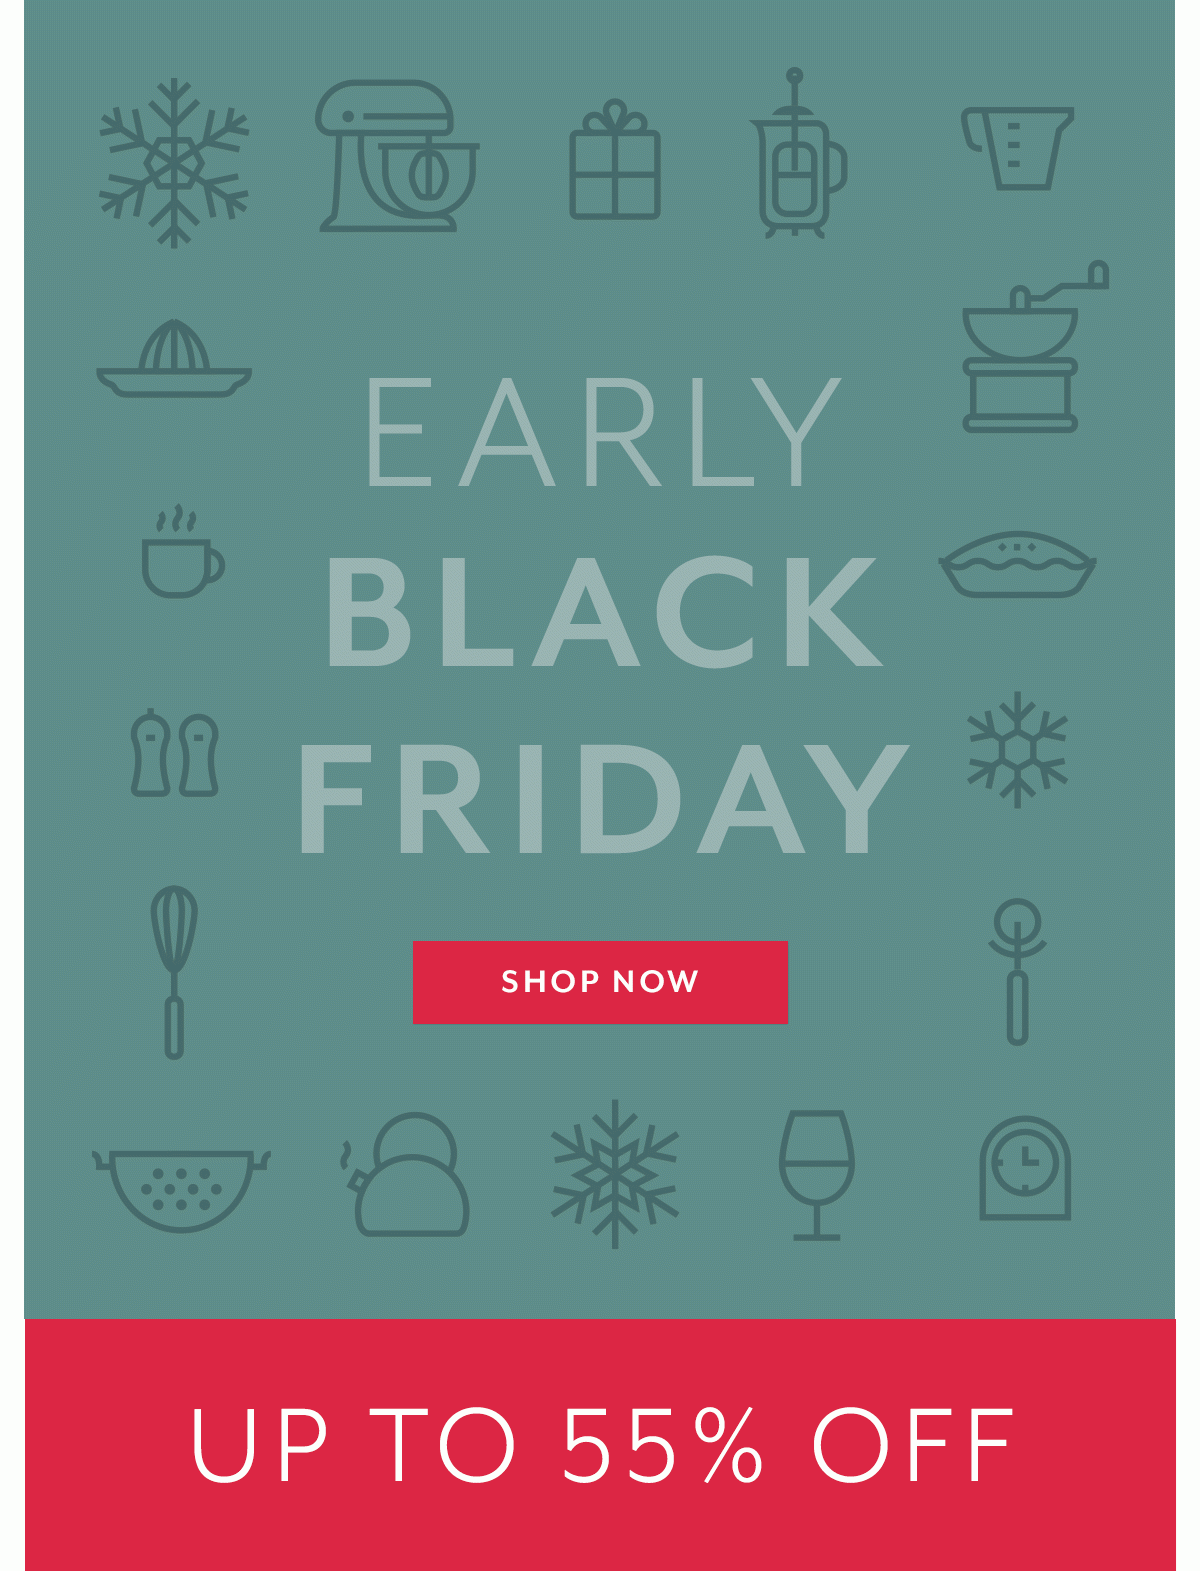 EARLY BLACK FRIDAY SALE